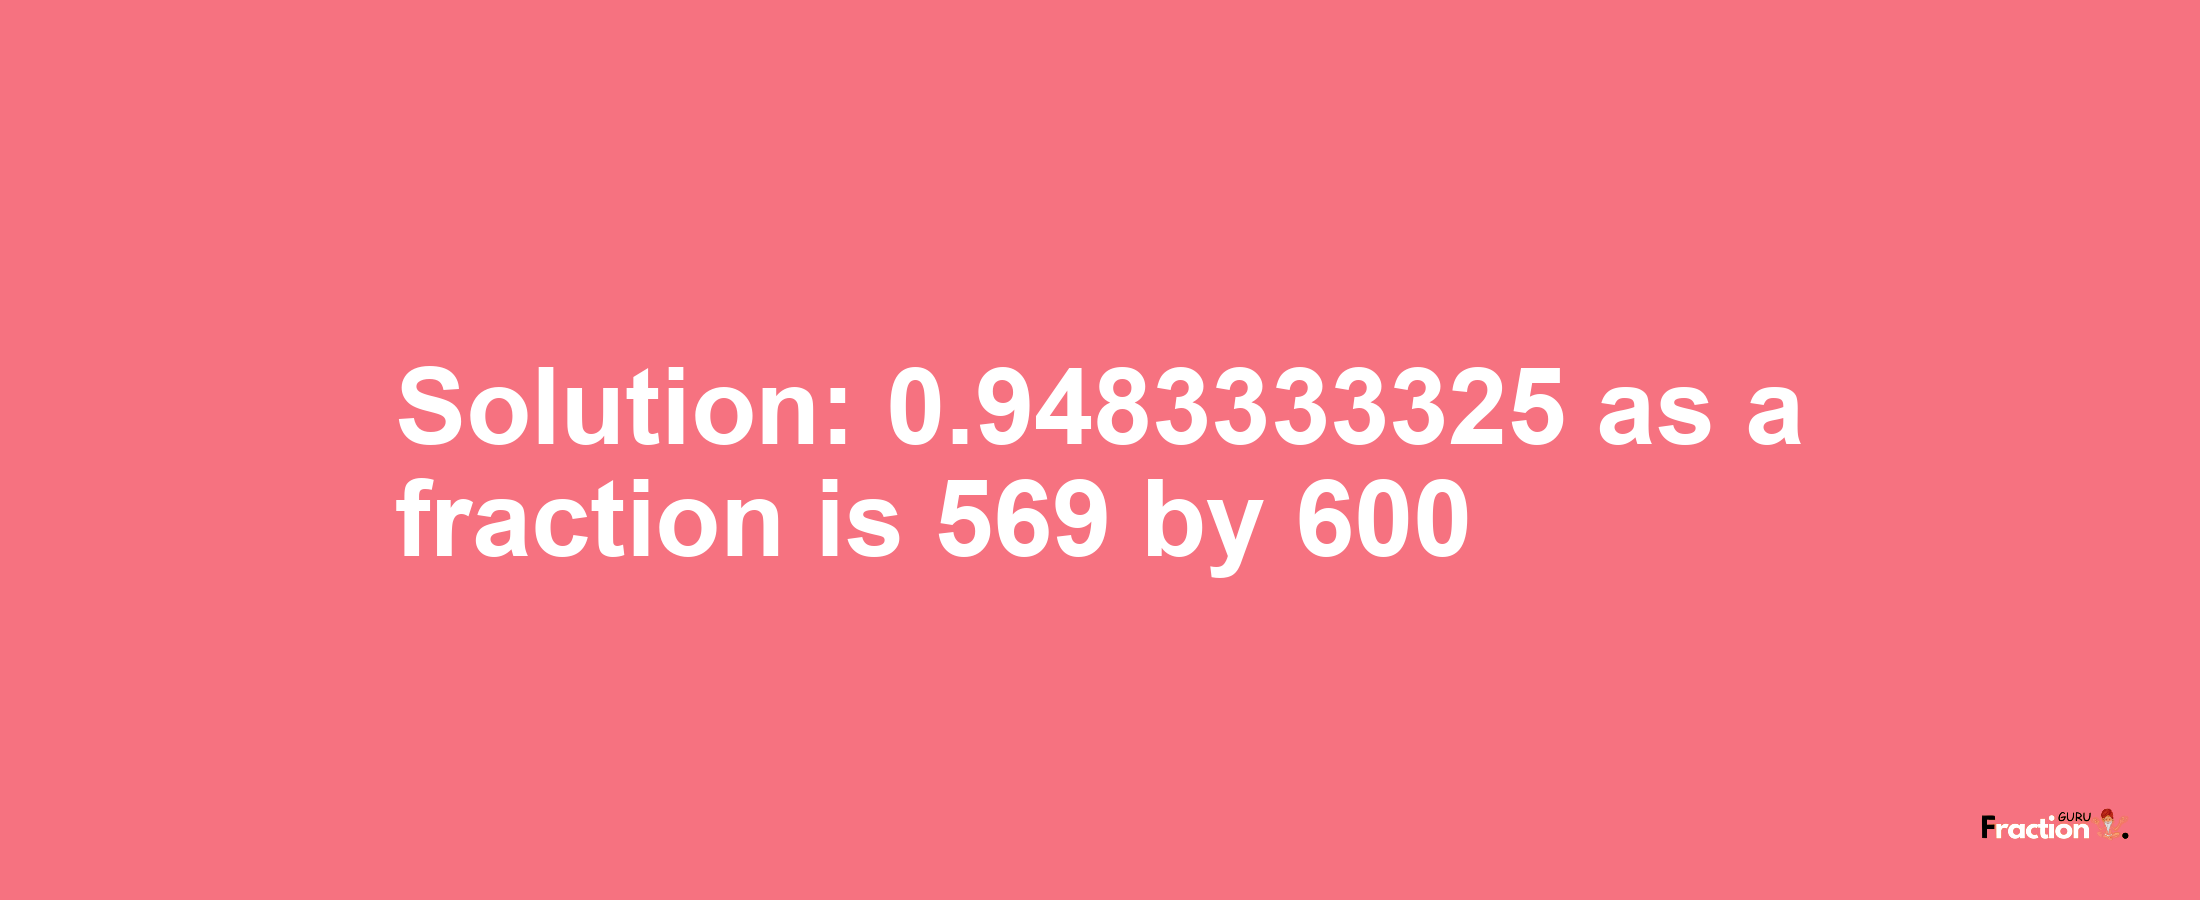 Solution:0.9483333325 as a fraction is 569/600